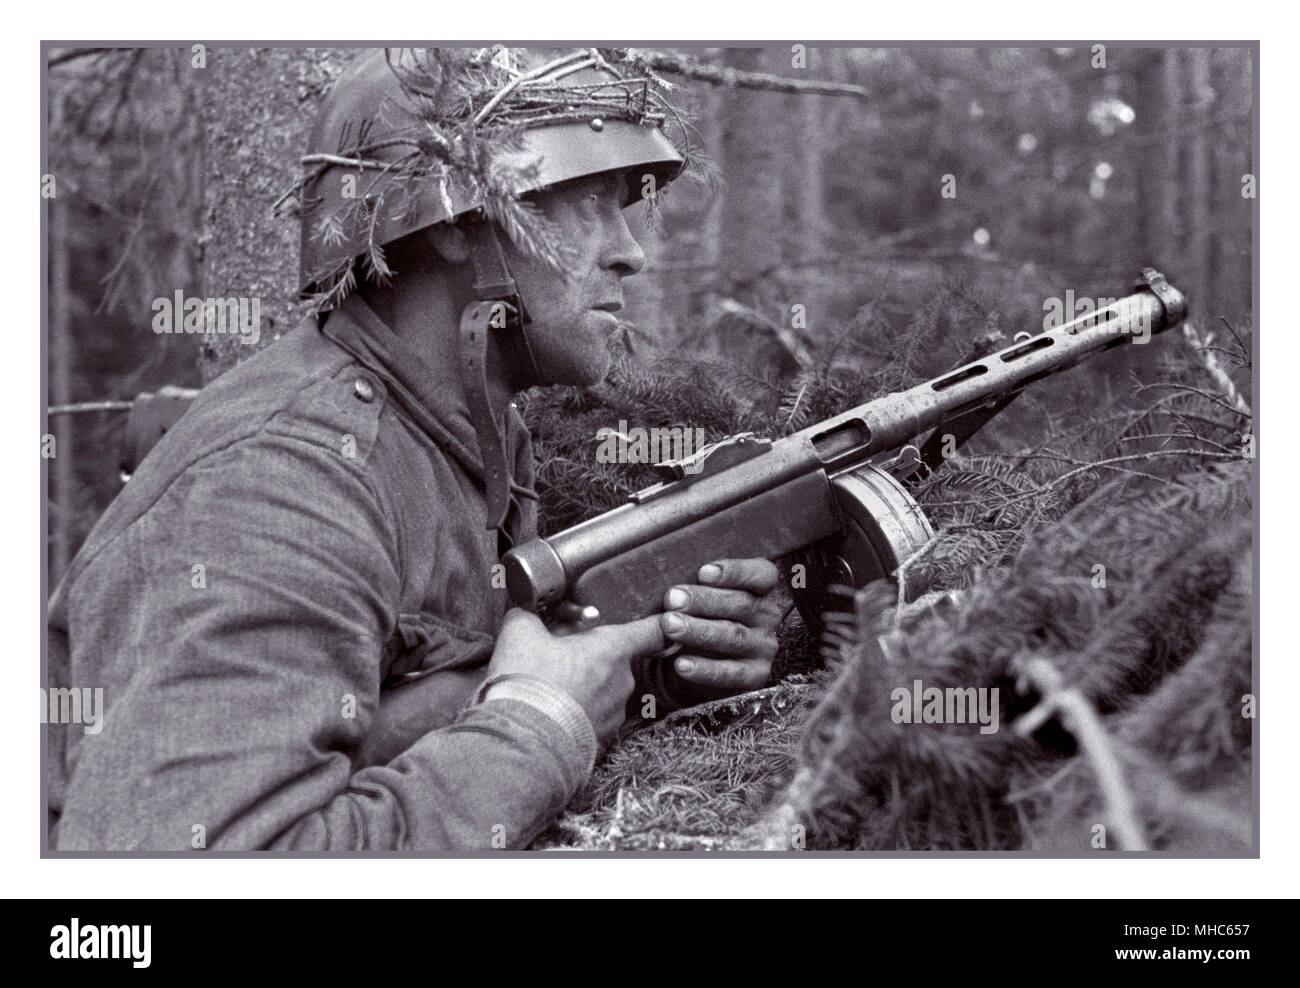 Finnish infantryman, with his K31 Suomi sub-machine gun fighting Russian invasion. The Continuation War was a conflict fought by co-belligerents Finland and Nazi Germany against the Soviet Union (USSR) from 1941 to 1944 during World War II . In Russian historiography, the war is called the Soviet–Finnish Front of the Great Patriotic War. Stock Photo